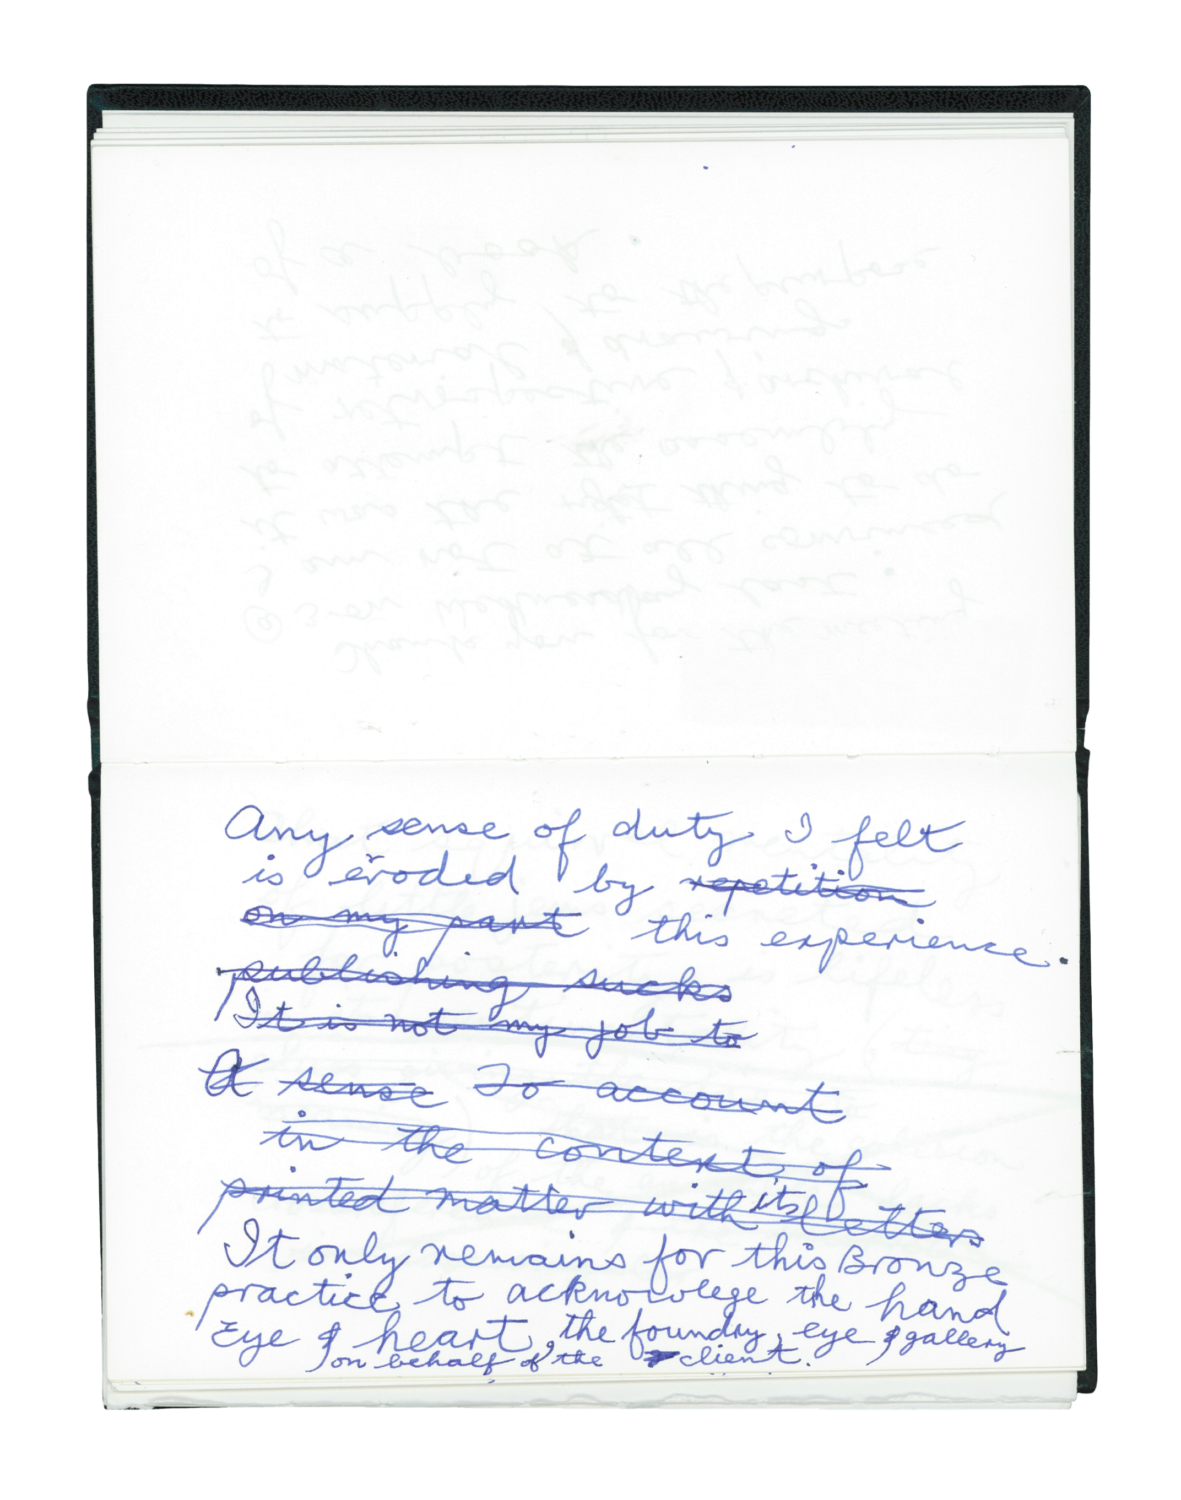 Sketch and notebook (February – April 1998)